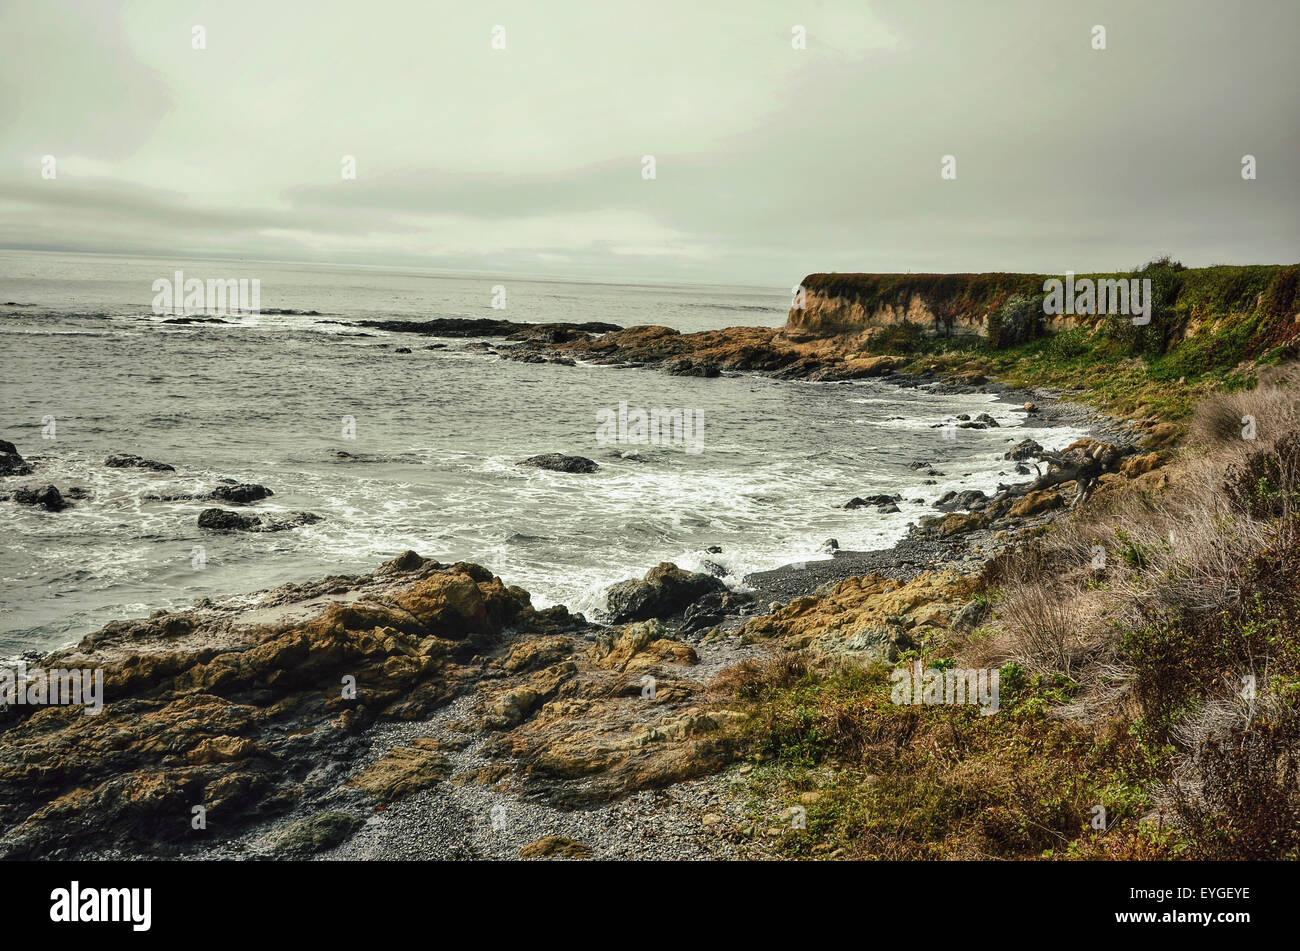 Images of the California Coastline from Mendocino to the San Mateo beaches and Big Sur Stock Photo